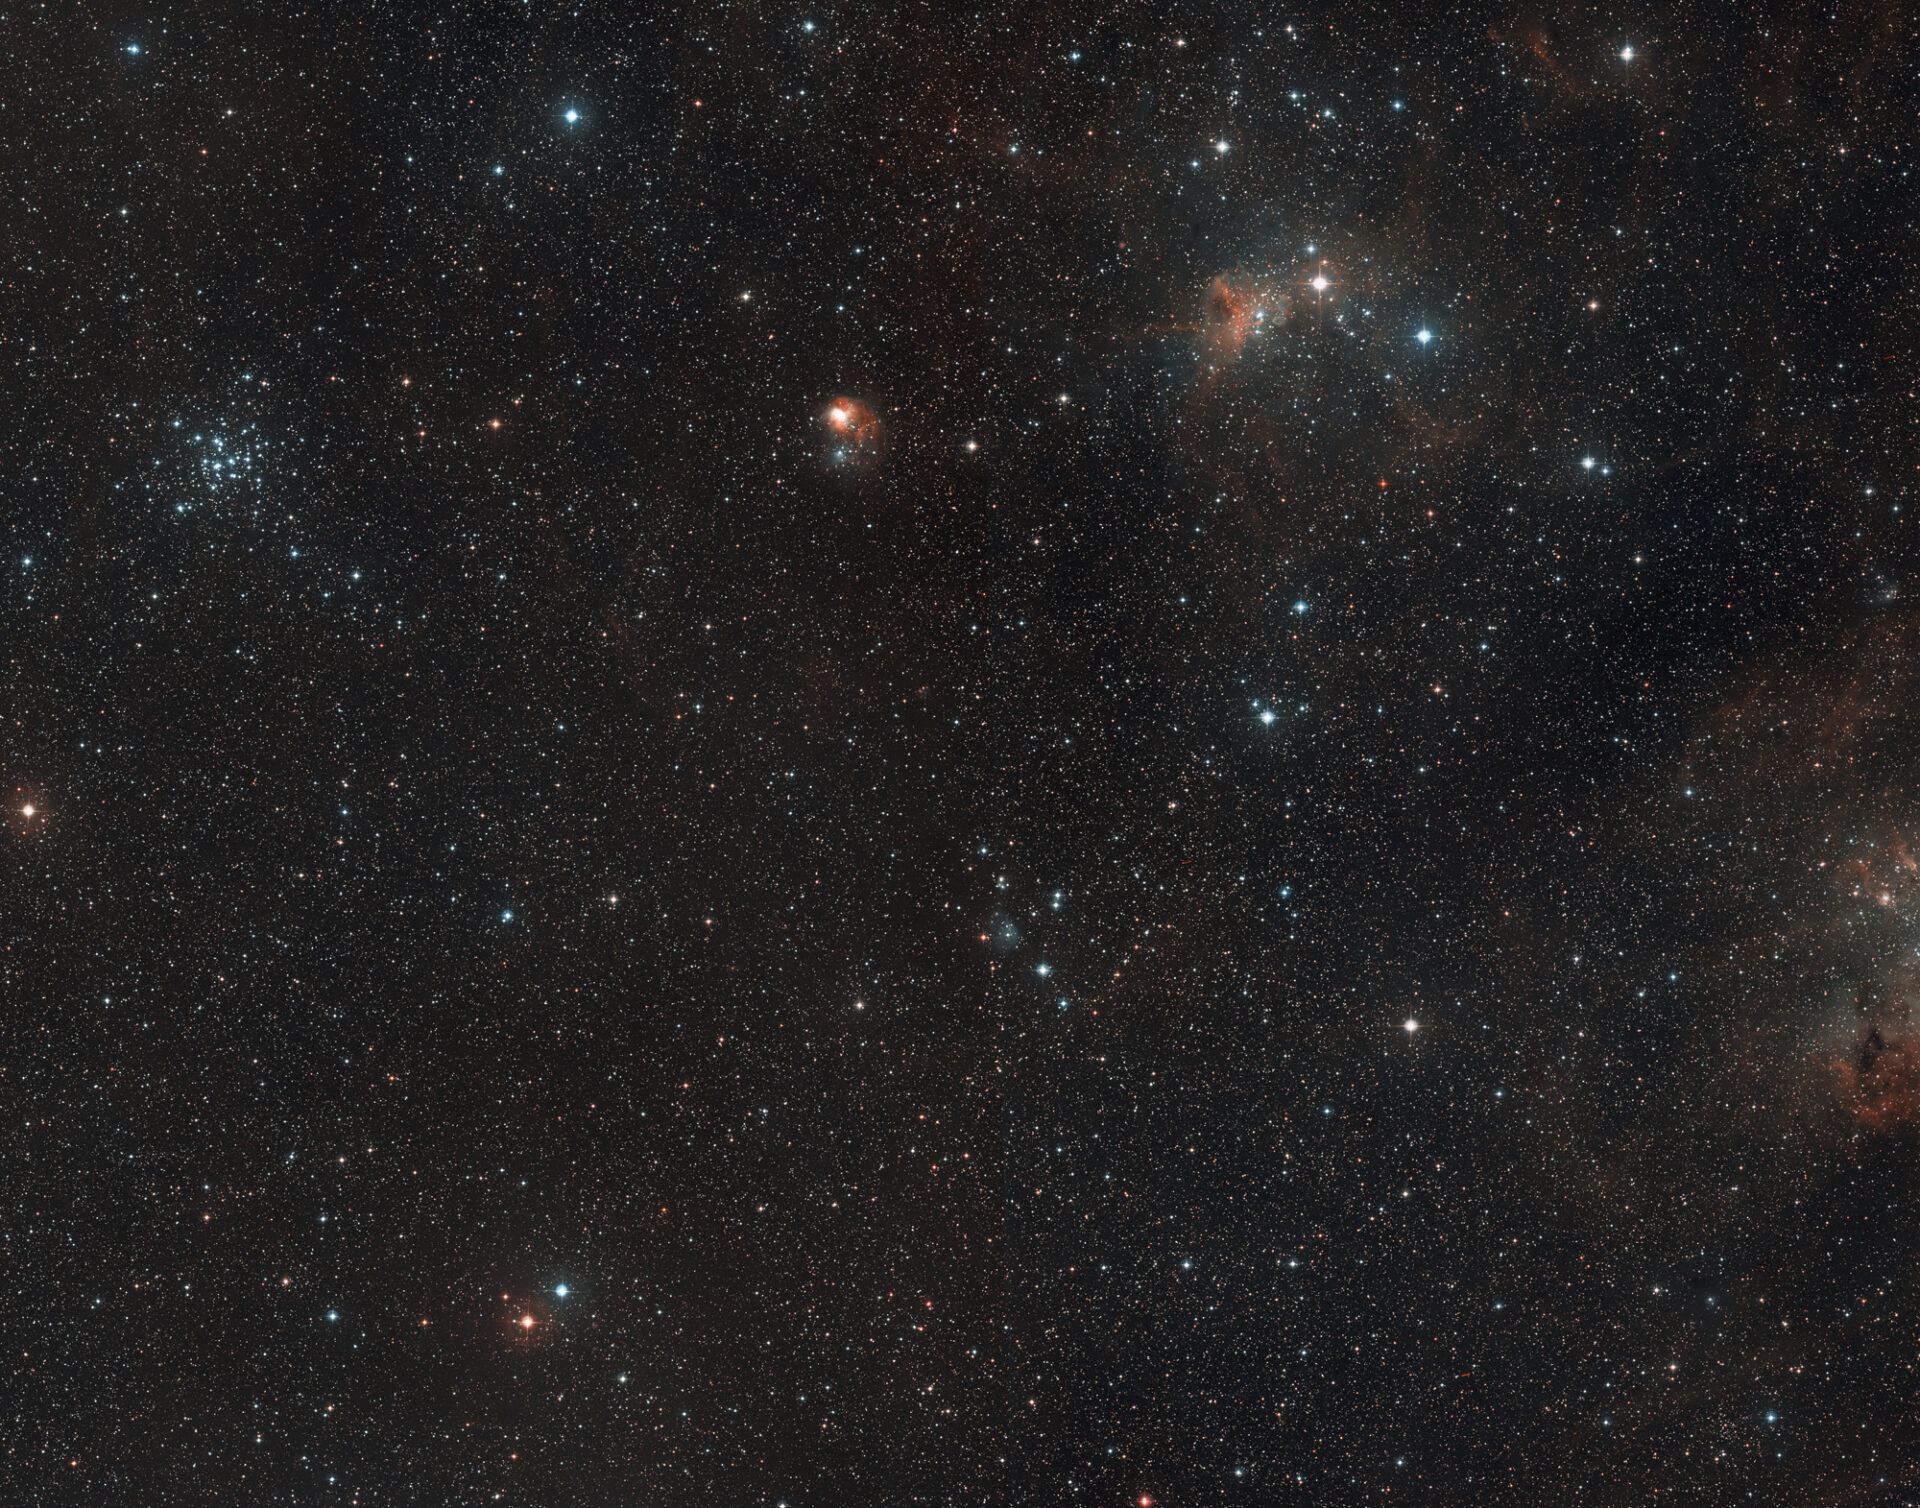 This wide-field view shows the region of the sky, in the constellation of Auriga, where the star-forming region AFGL 5142 is located. This view was created from images forming part of the Digitized Sky Survey 2. Credit: ESO/Digitized Sky Survey 2. Acknowledgement: Davide De Martin